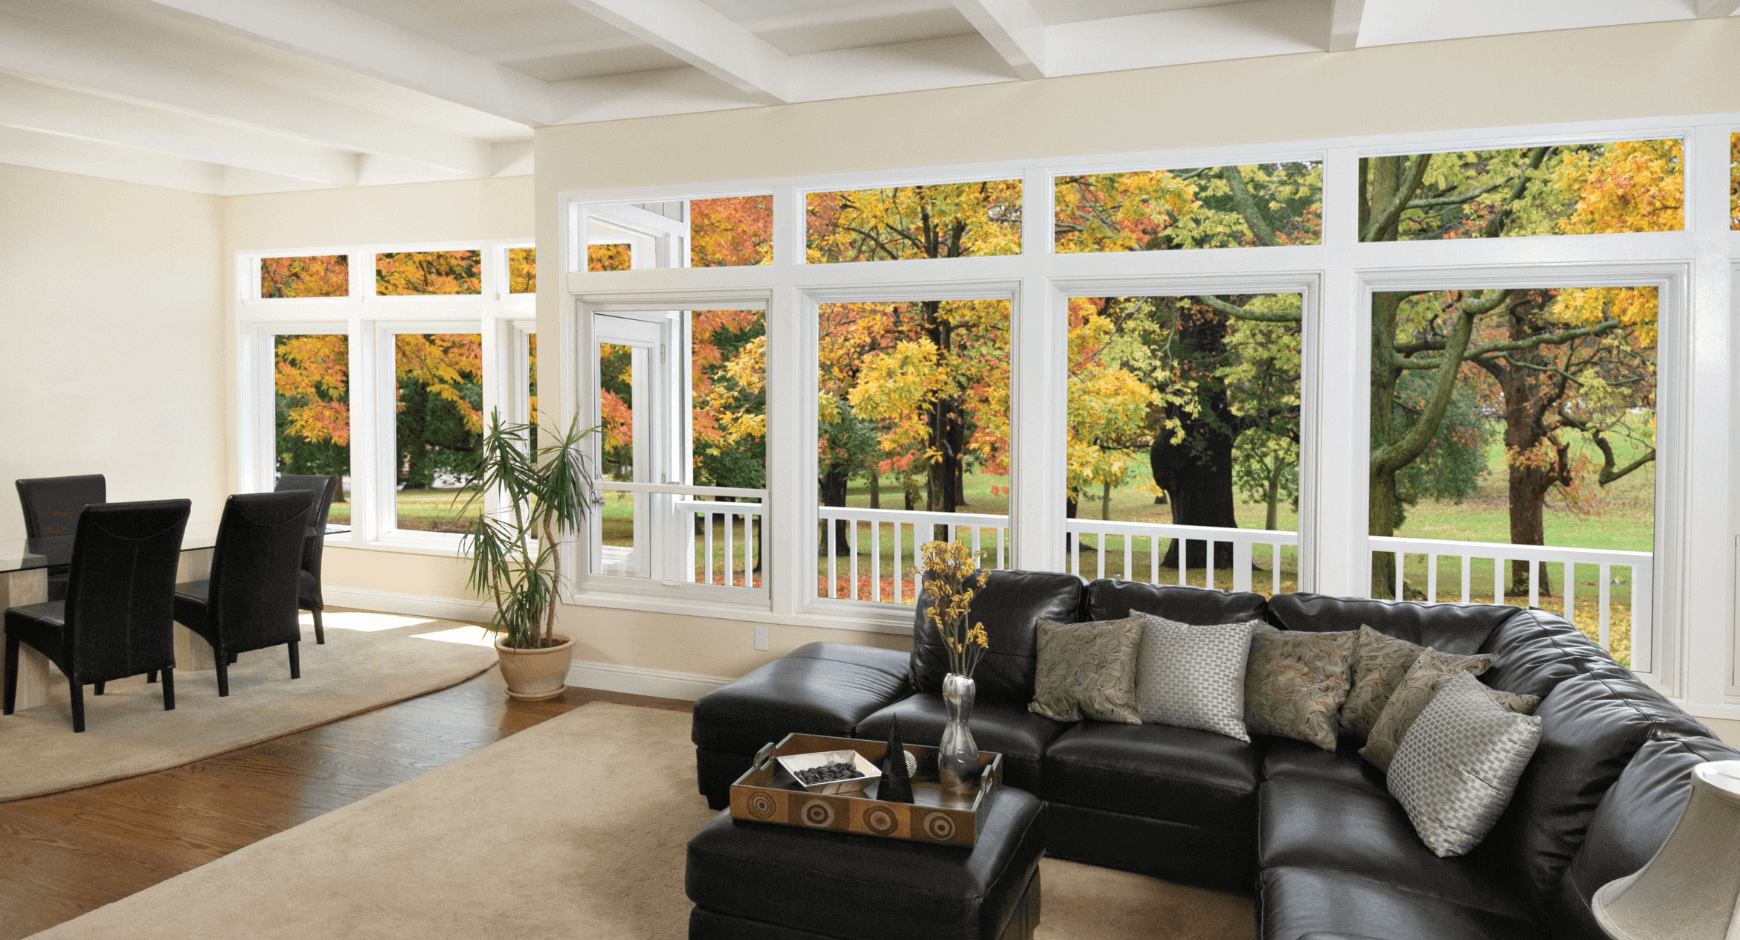 Image of a comfortable home with large windows looking out into the fall woods